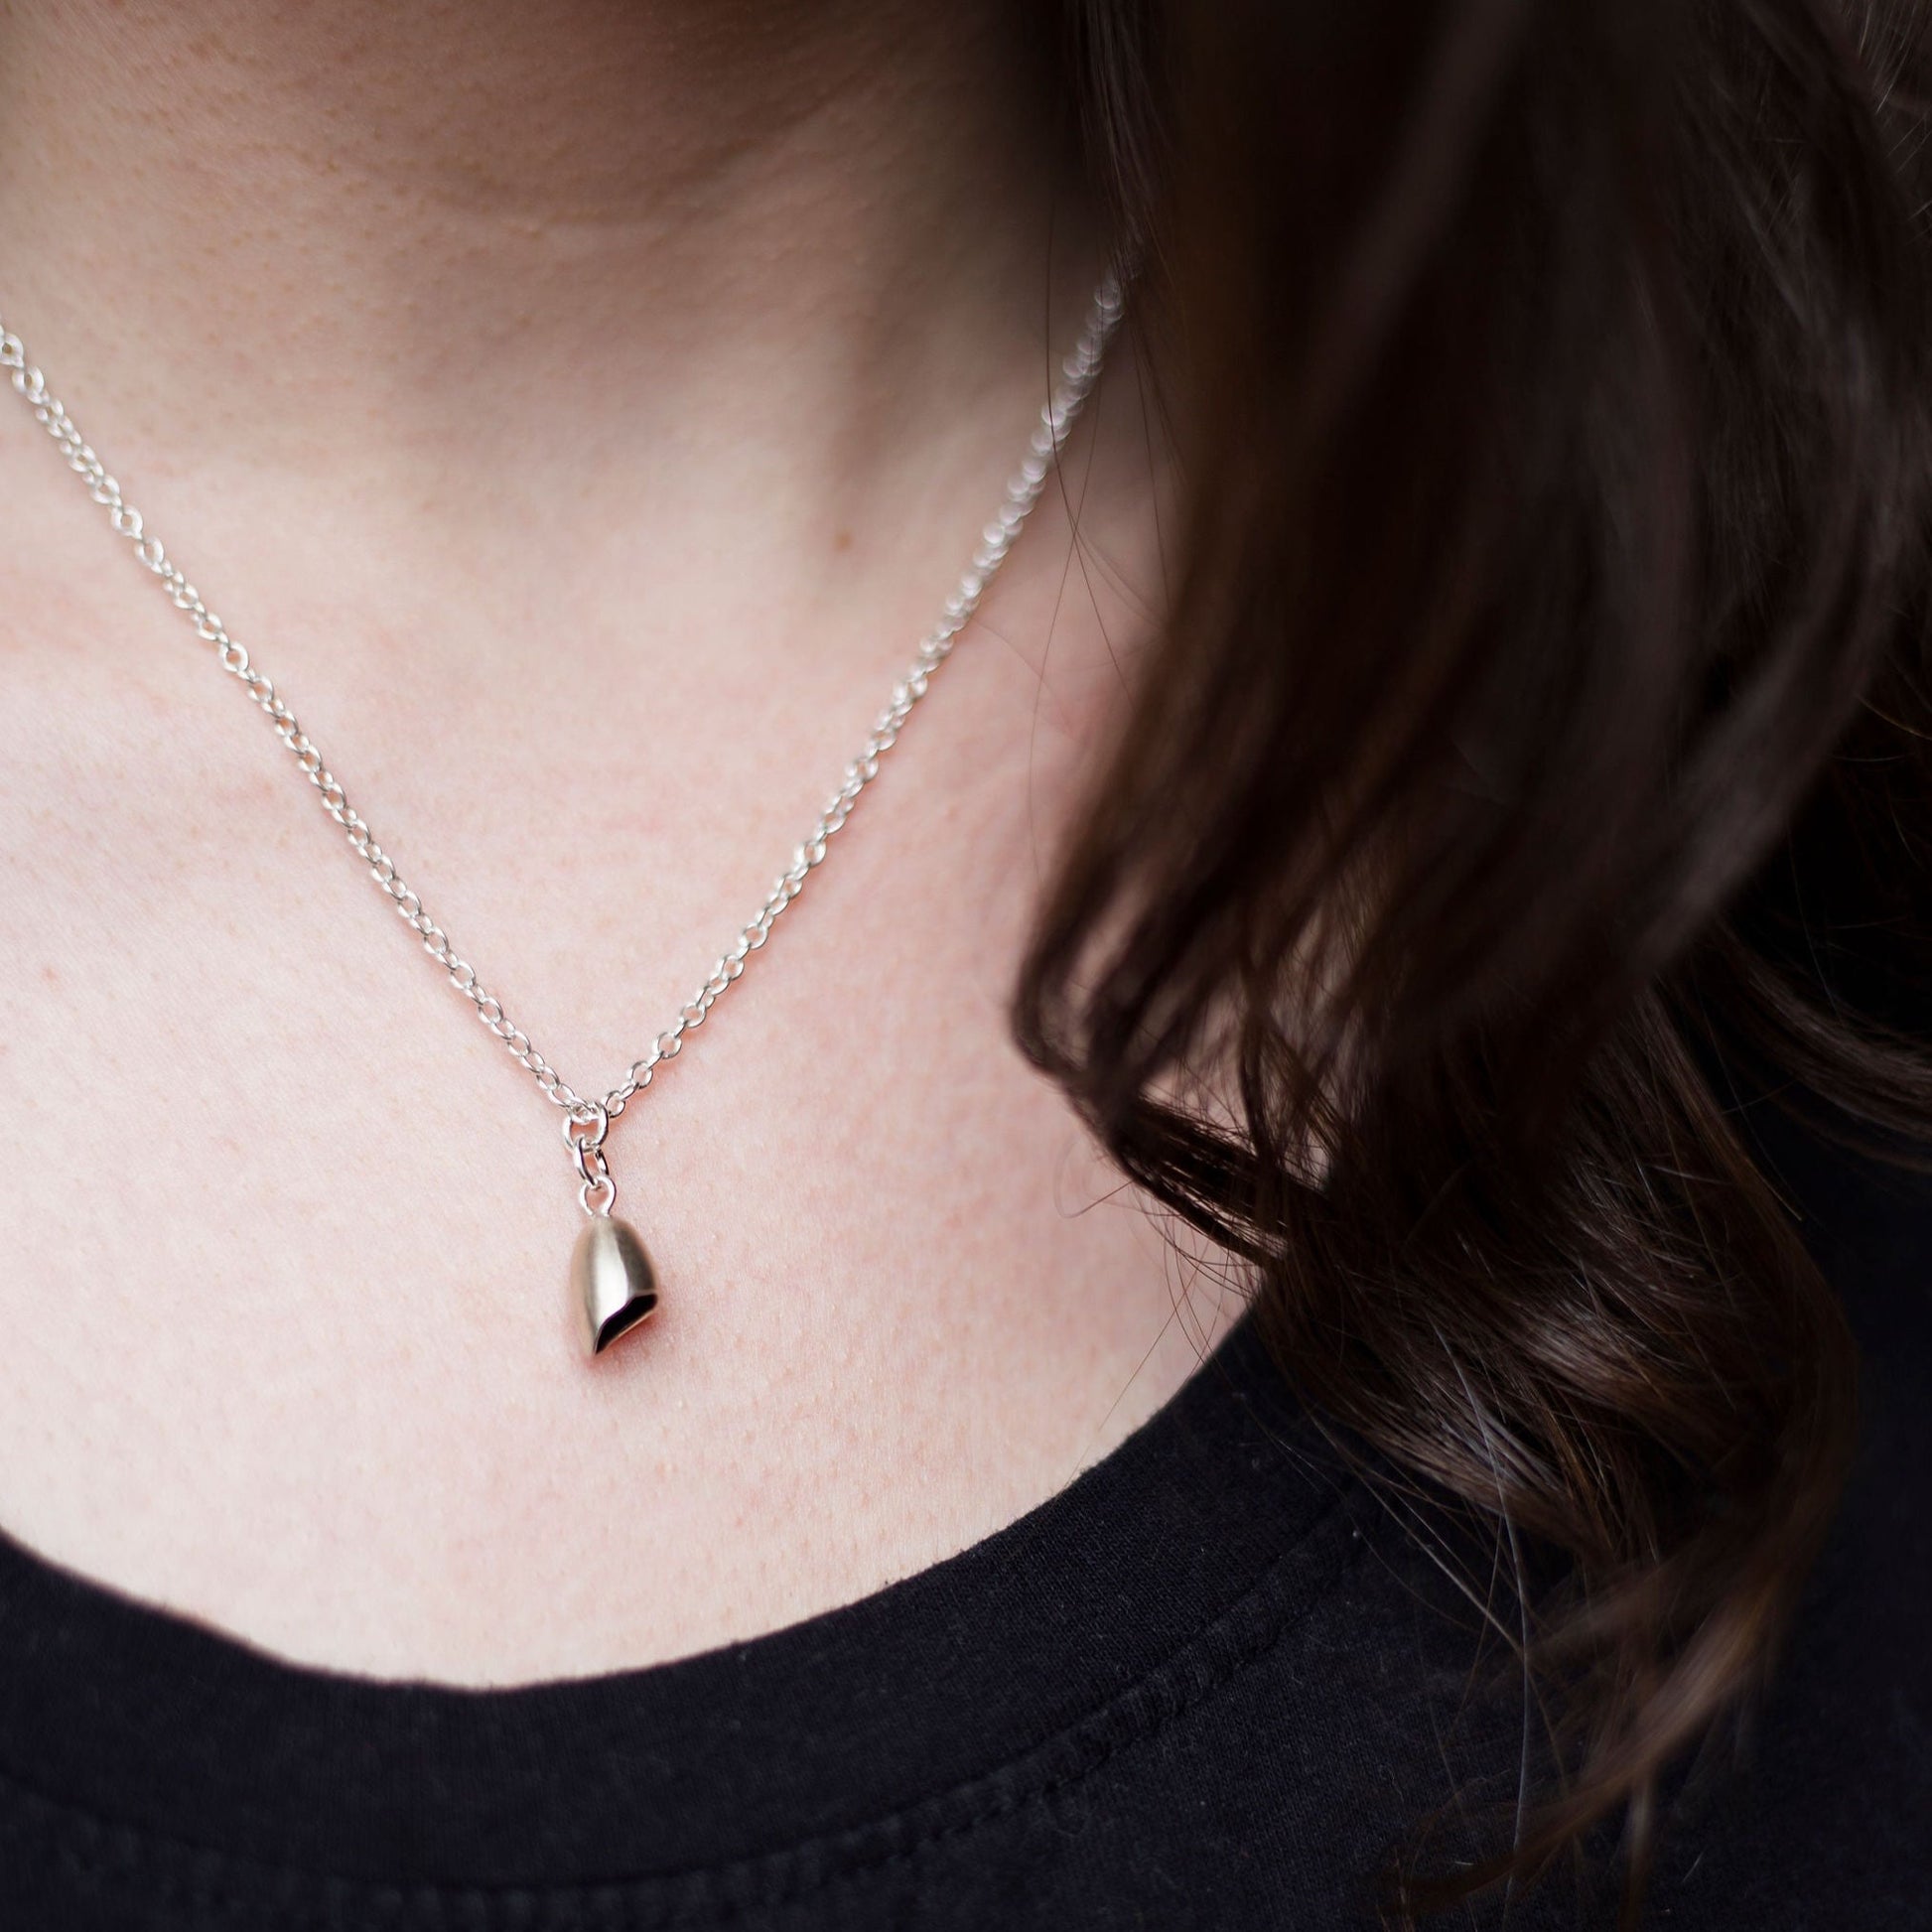 sterling silver pod necklace with dark inside on chain being worn with a black t-shirt